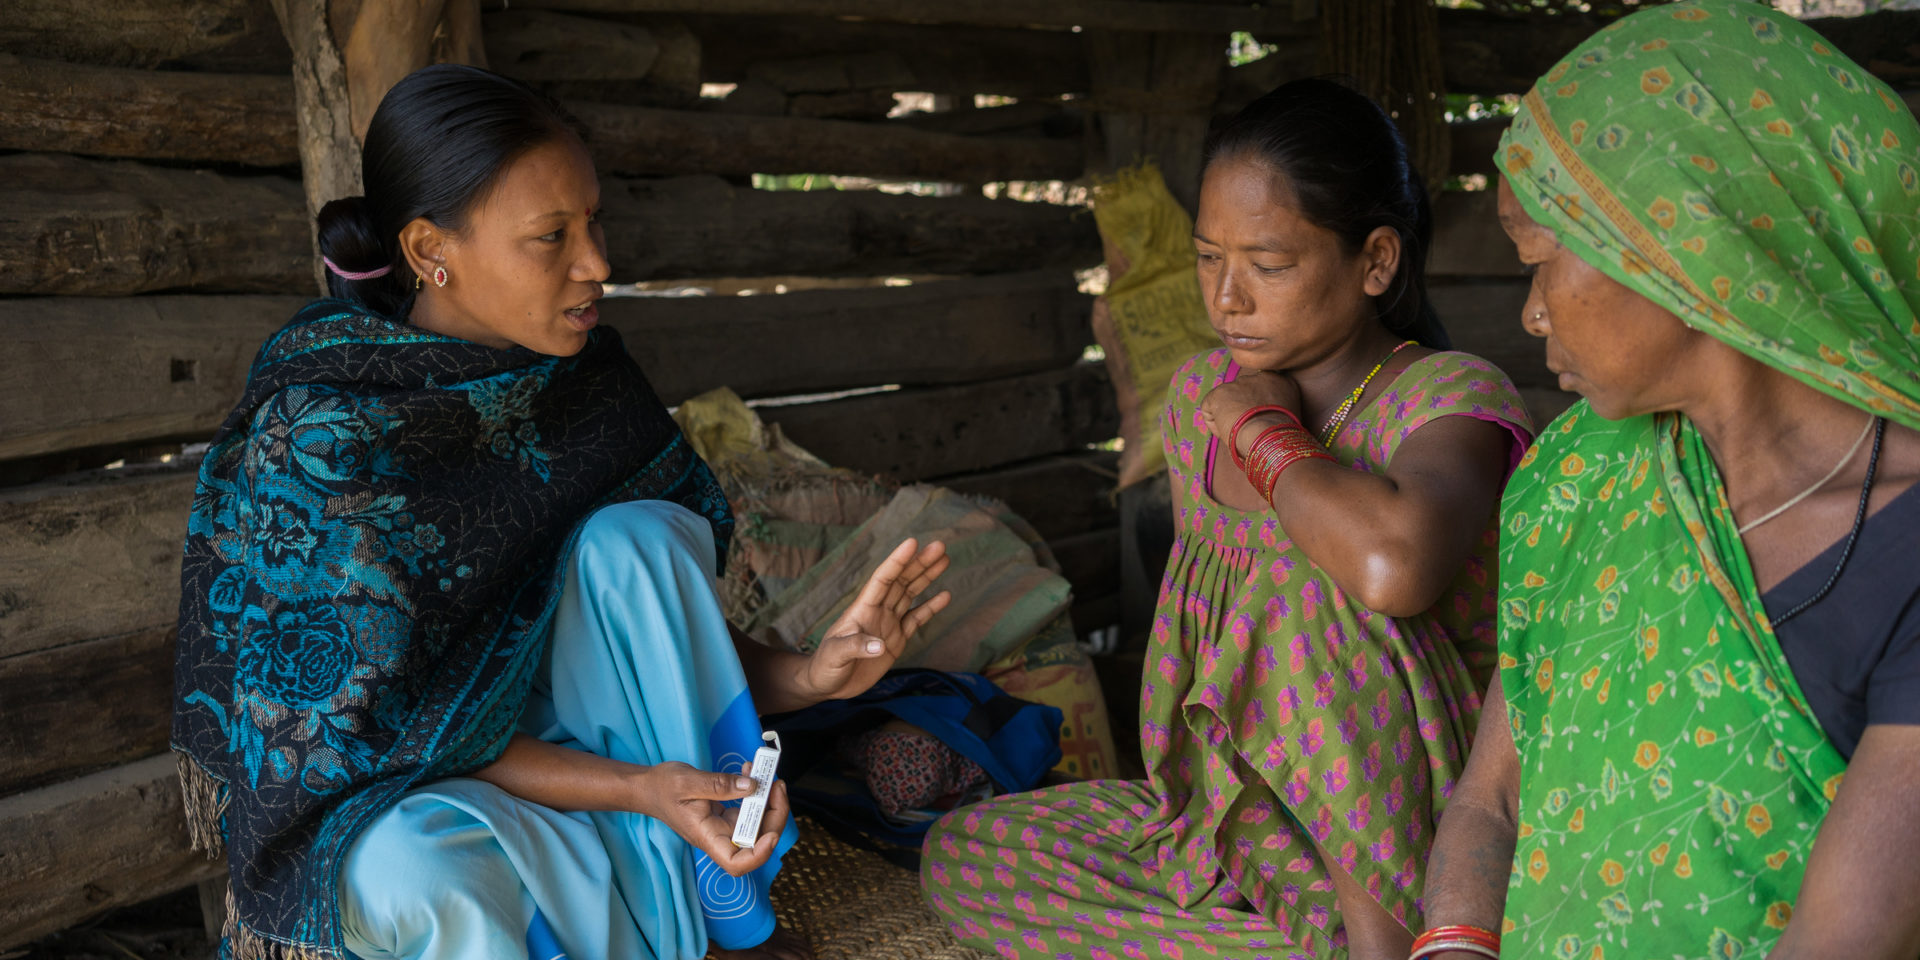 A community health volunteer speaking with a pregnant woman in her home as another woman listens.